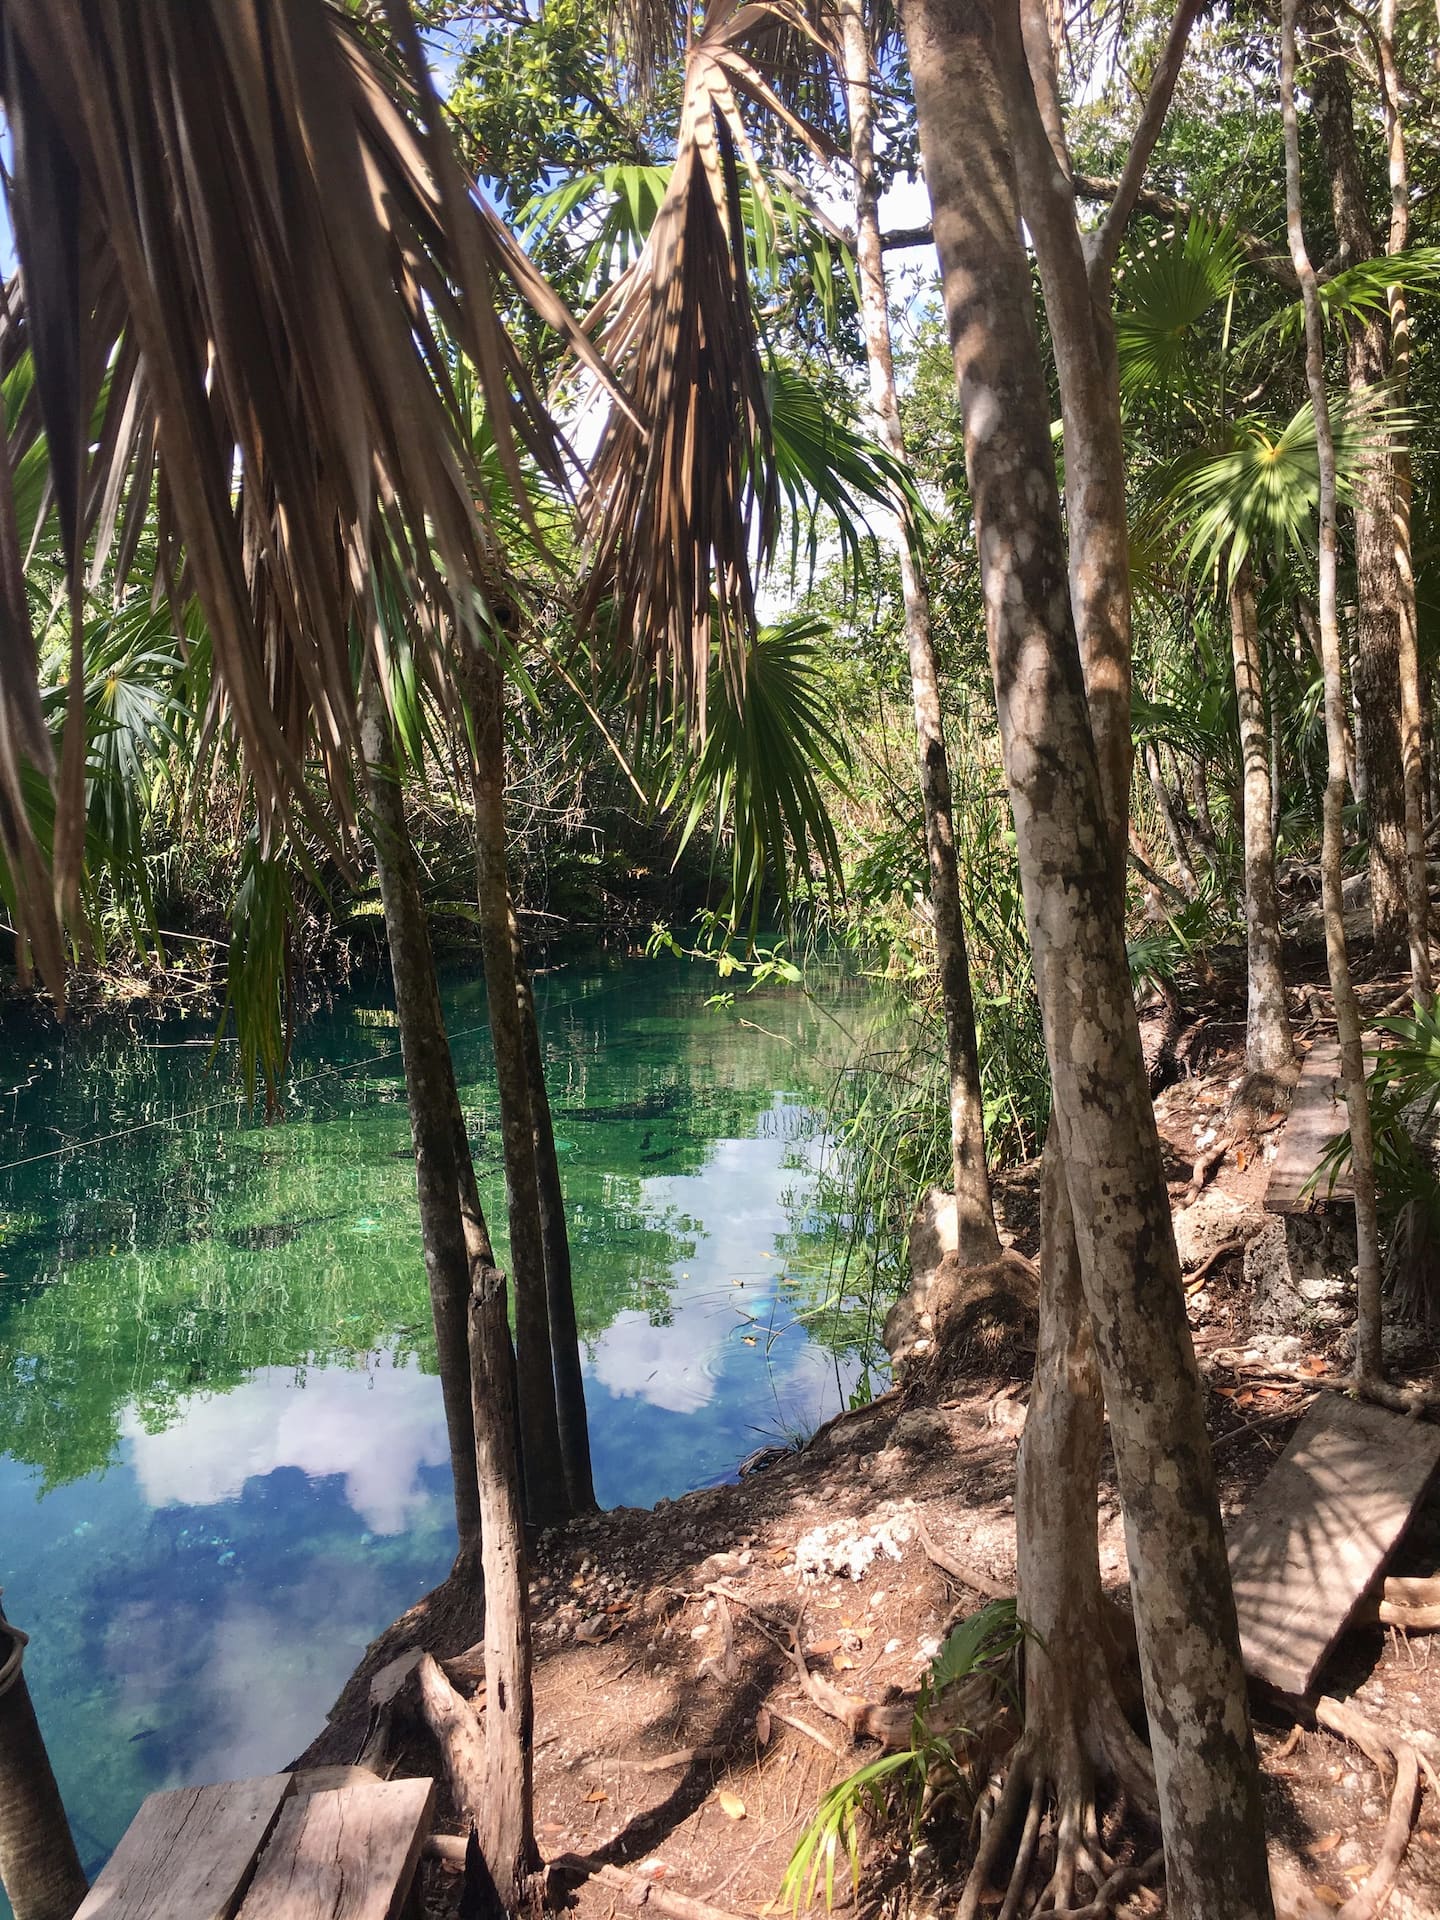 one of the best tulum cenotes in mexico - a natural freshwater jungle river | Cenotes Tours Tulum